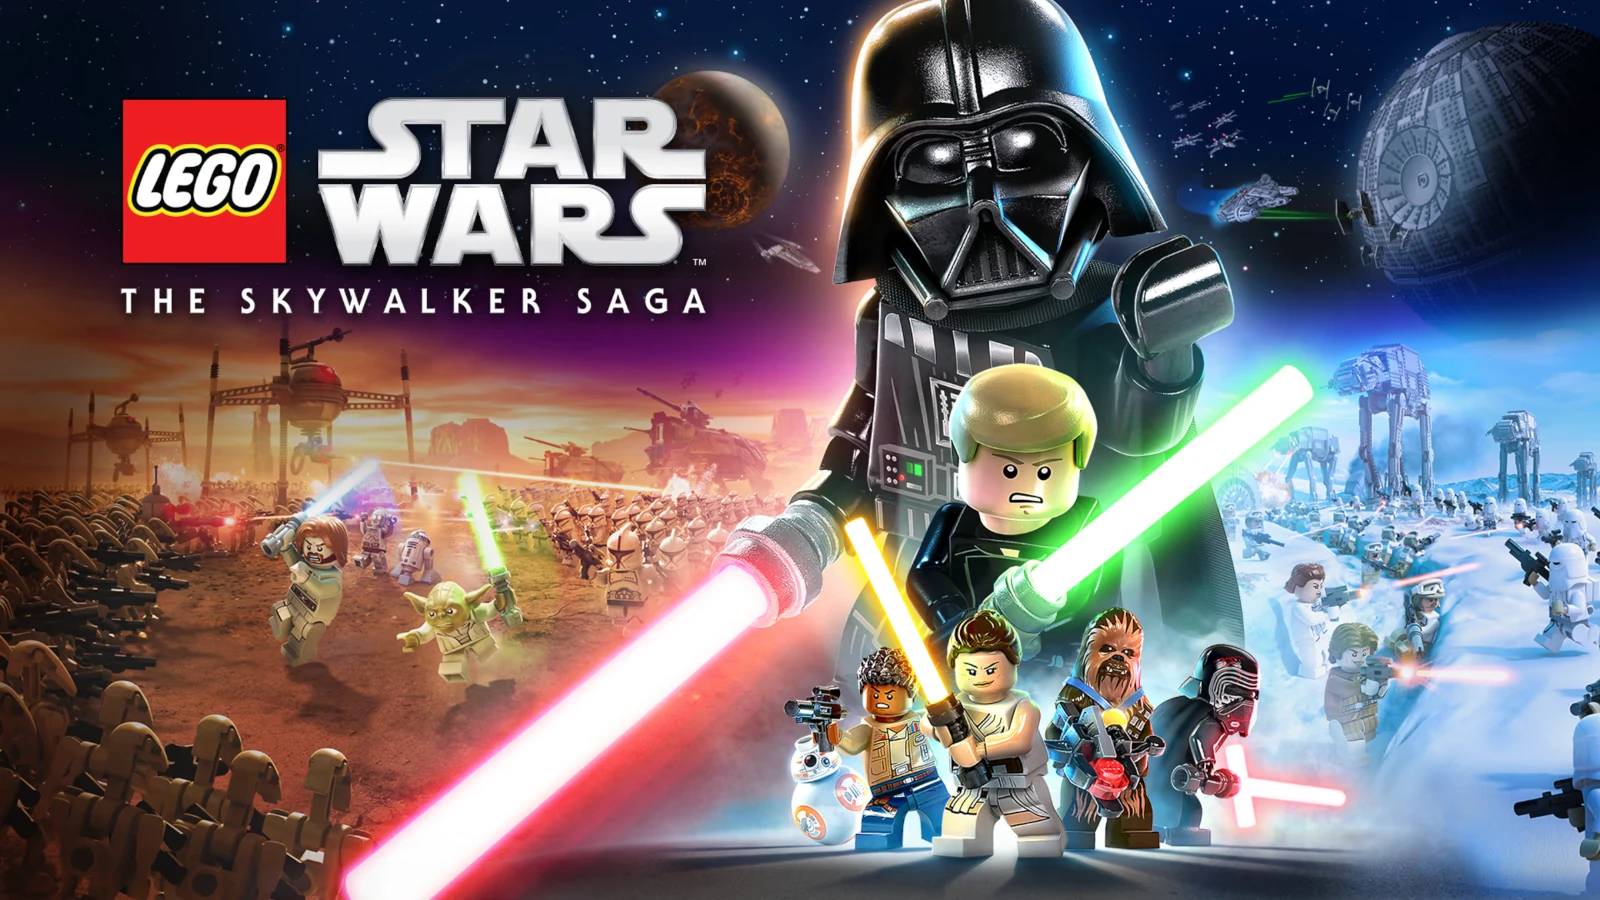 Lego Star Wars The Skywalker Saga Comparing New and Classic Missions